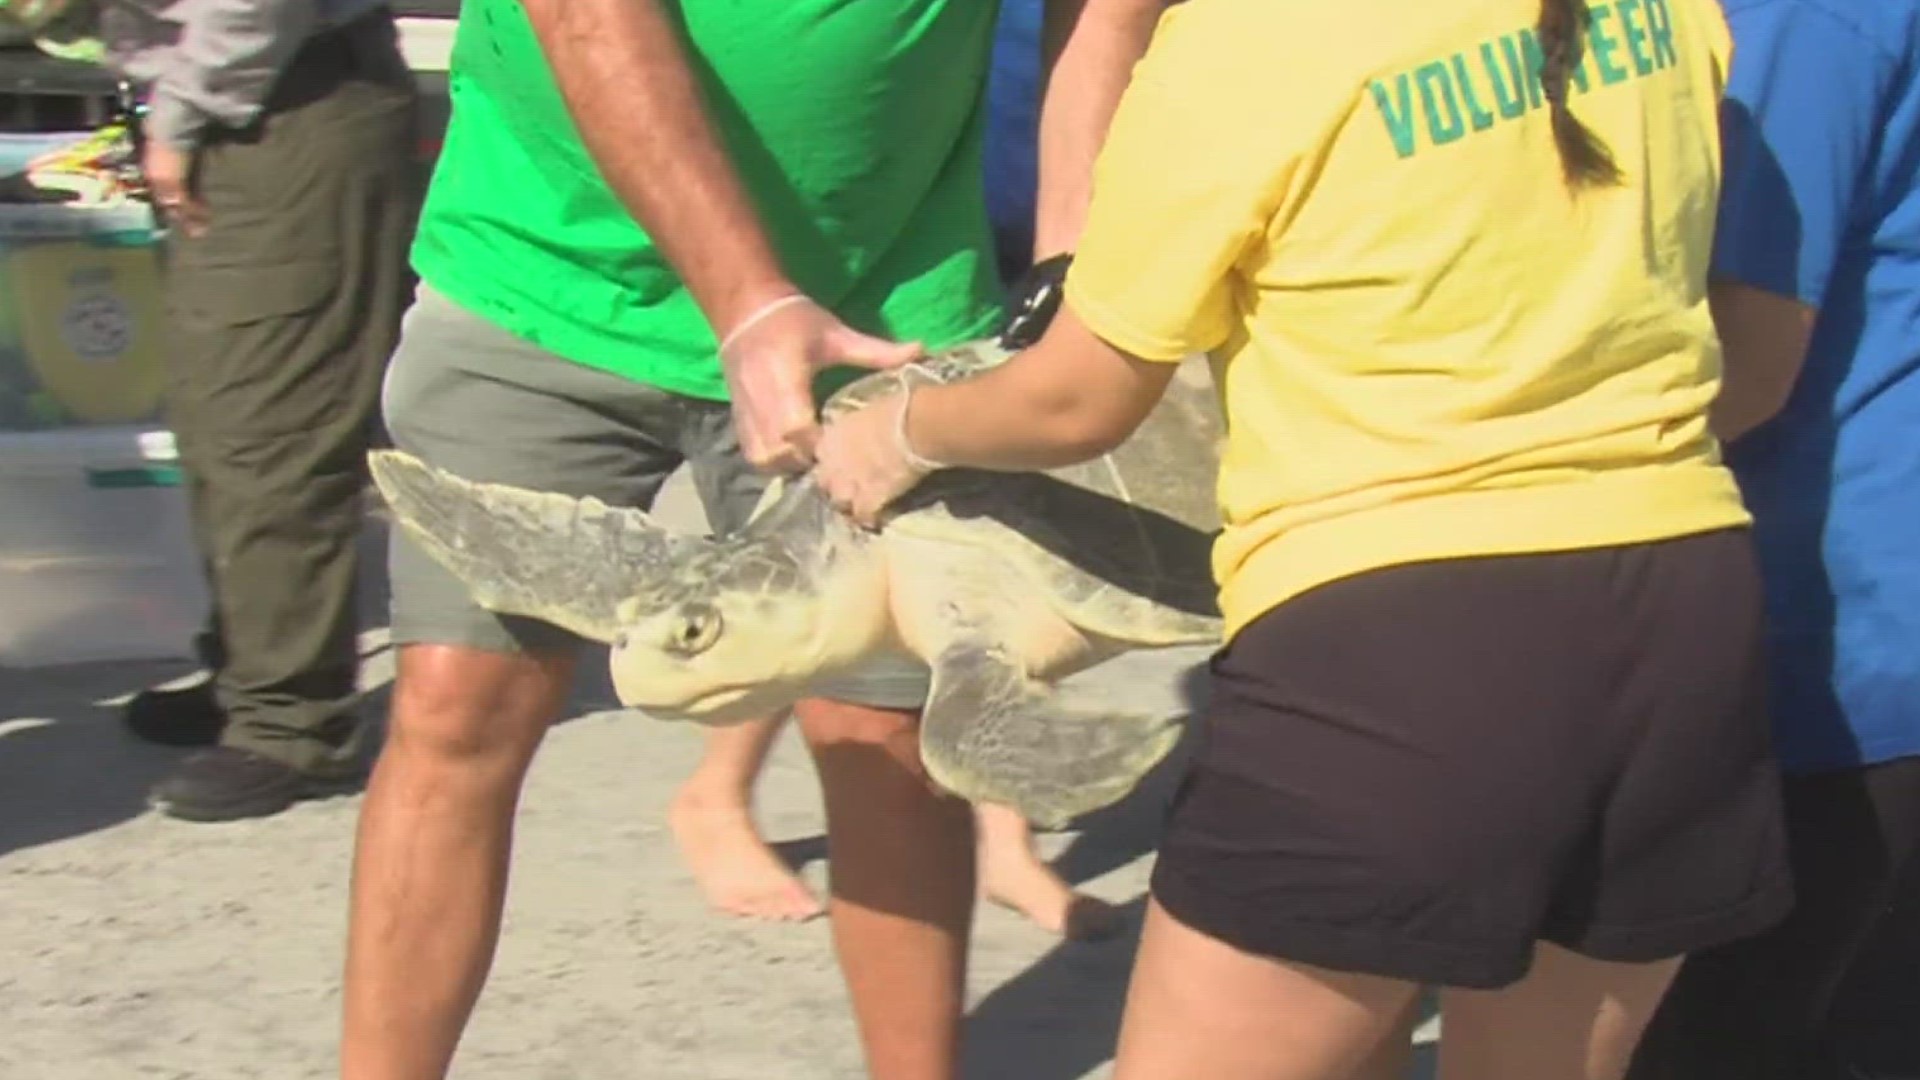 The turtles were part of the last turtle release of the year. Kemp's ridleys are the rarest and most endangered species of turtle.